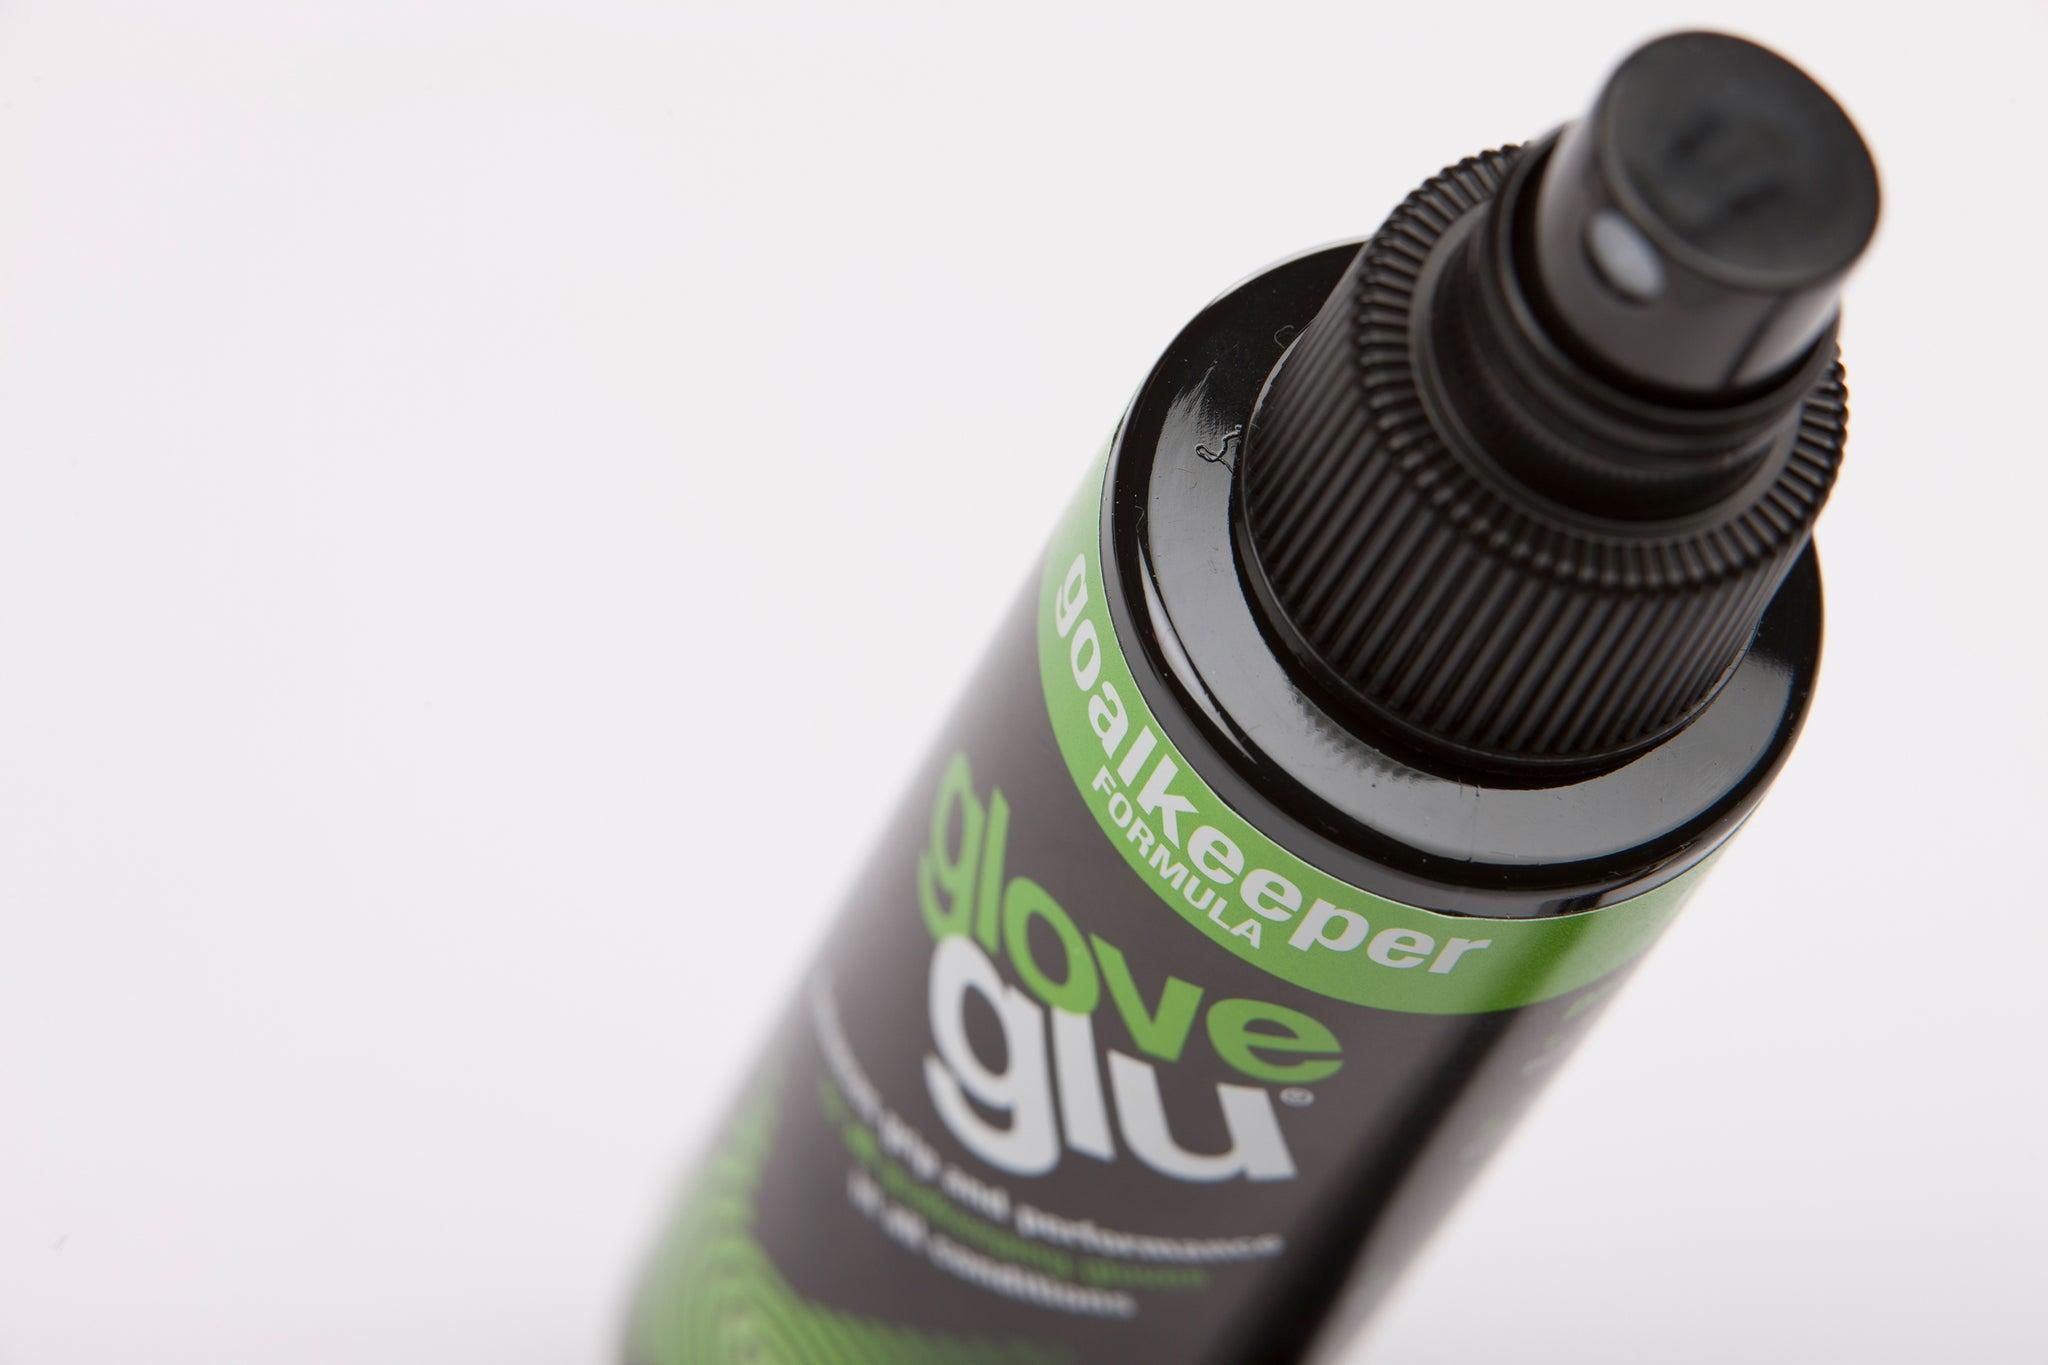 Glove Glu solutions can help you maximize the grip of your goalkeeper gloves.